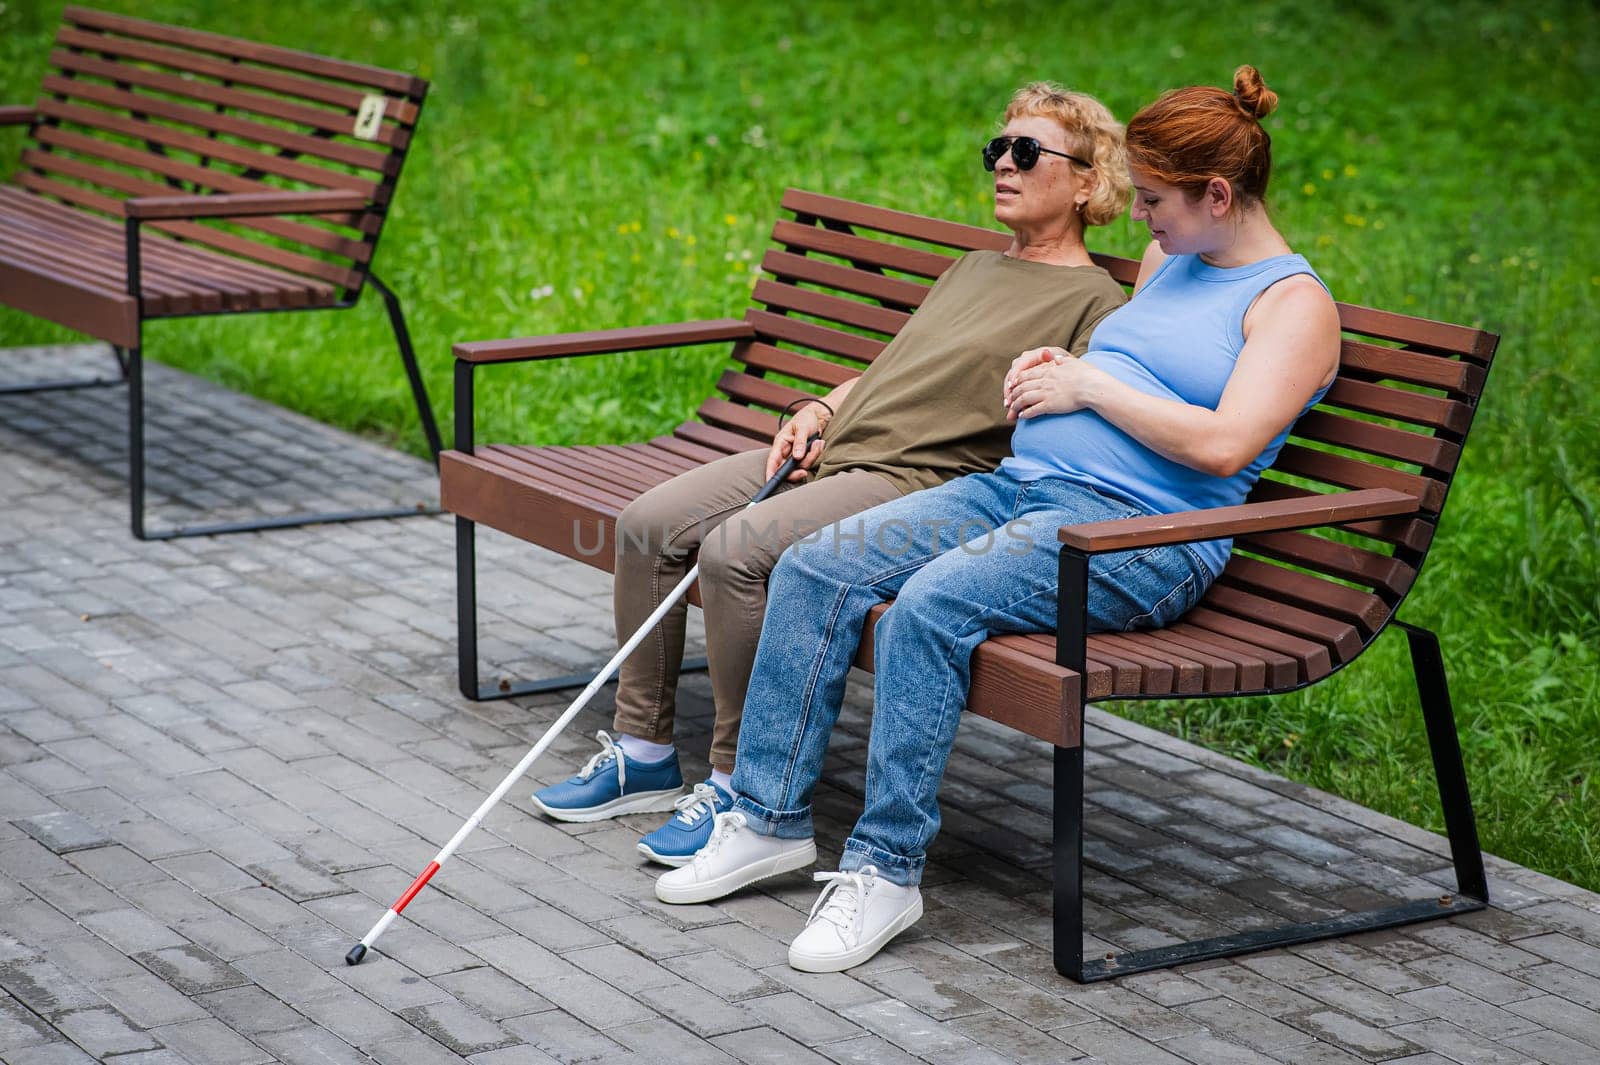 An elderly blind woman and her pregnant daughter are sitting on a bench in the park